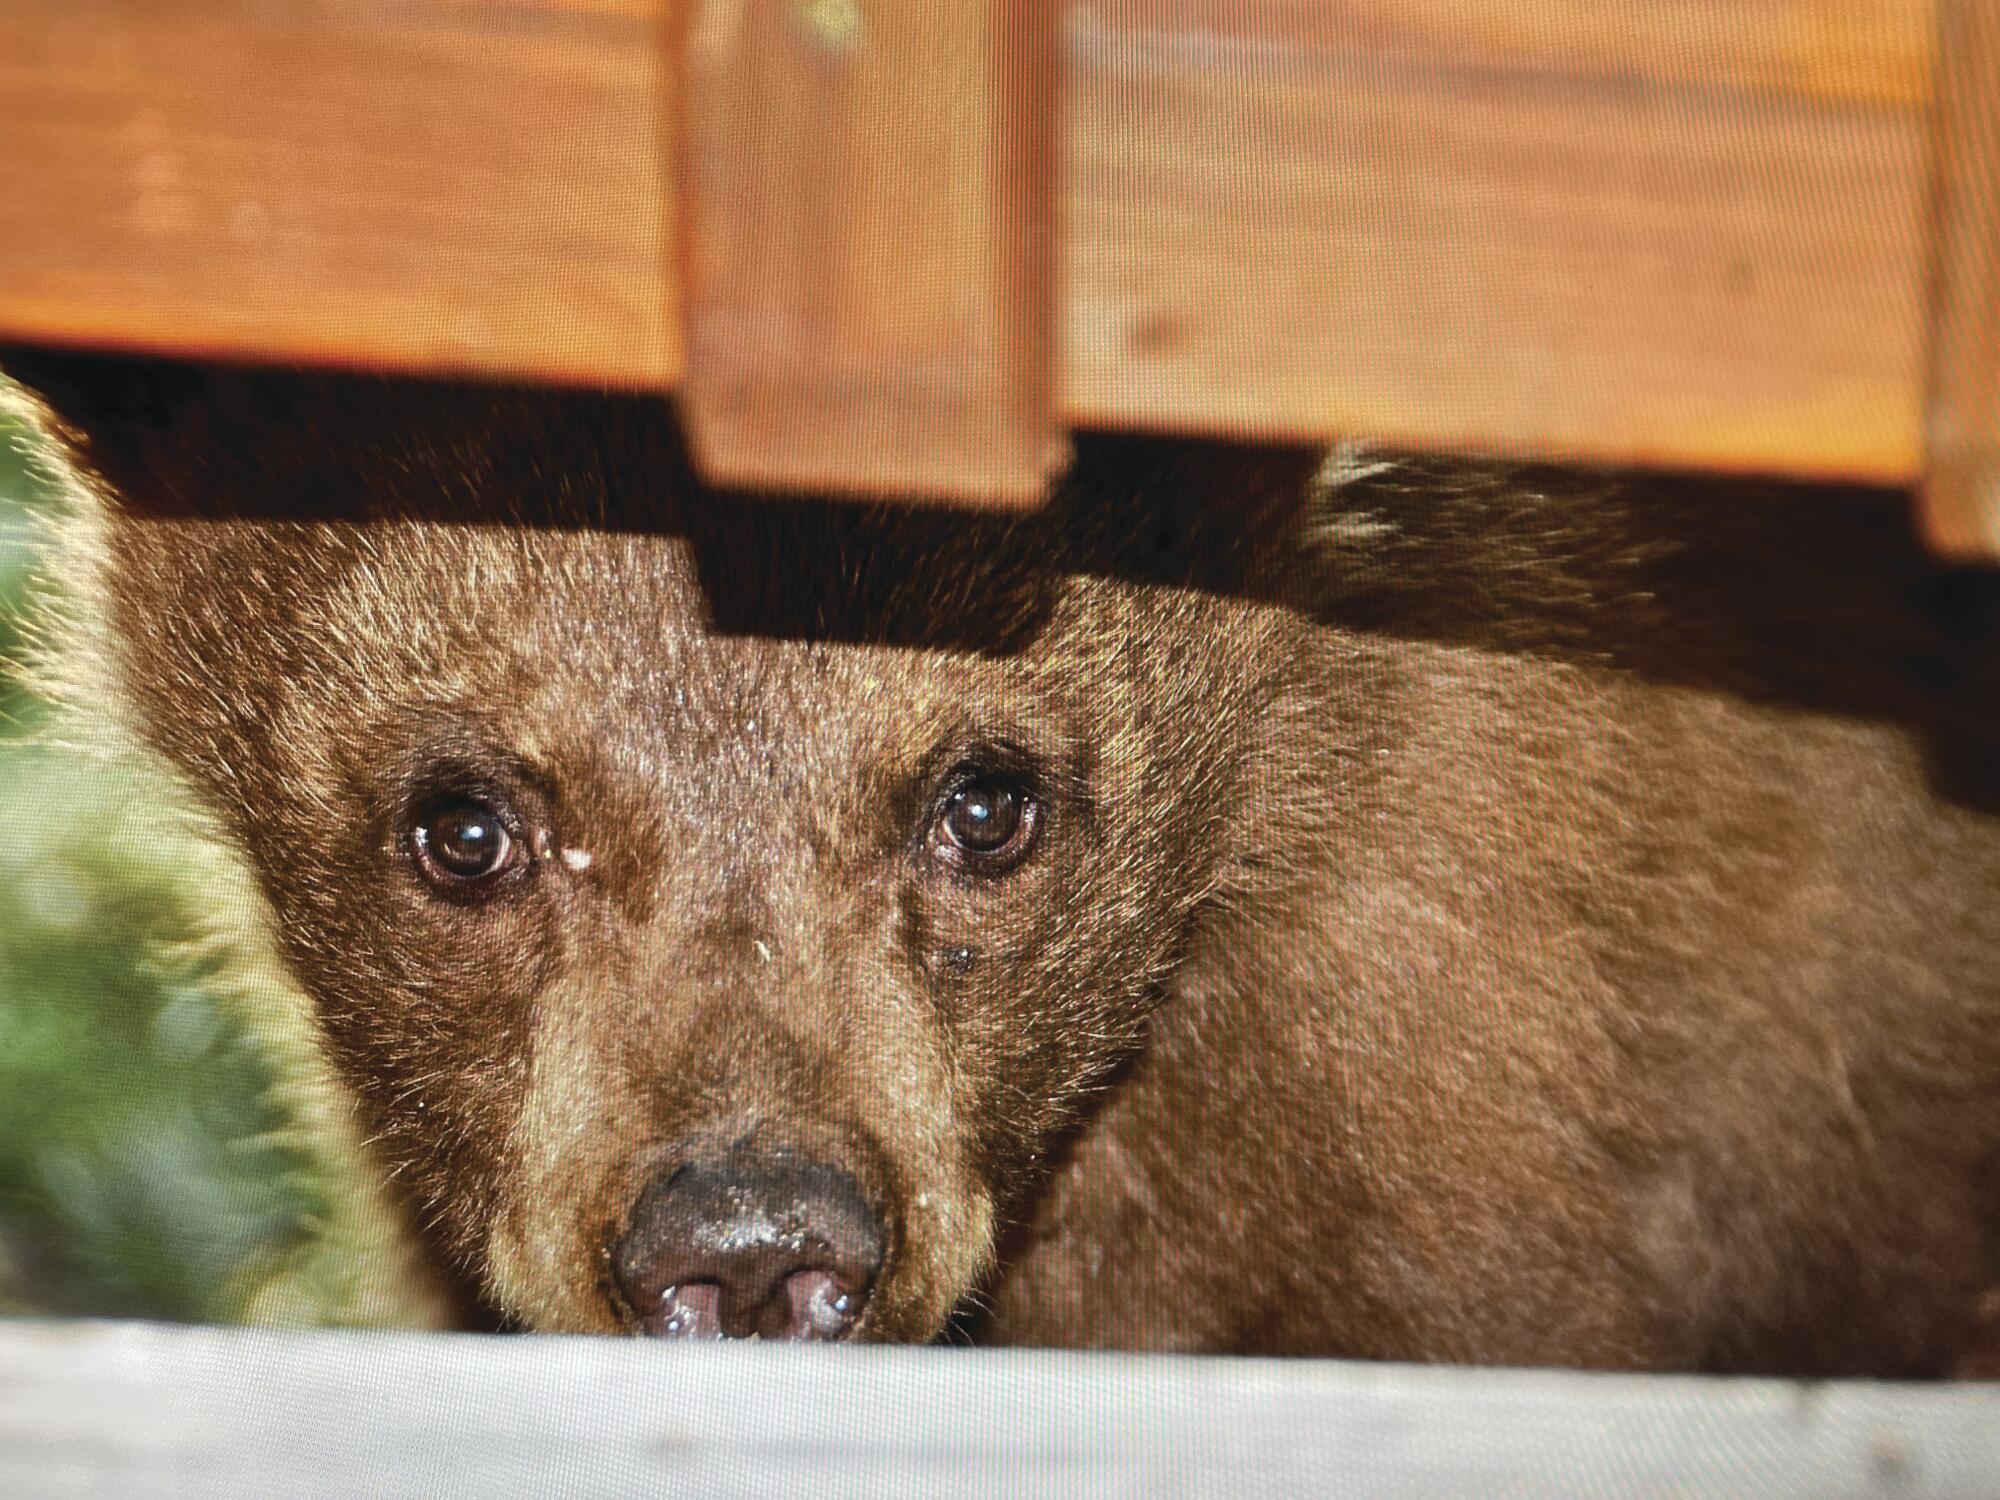 A young bear peeks out from under a deck.